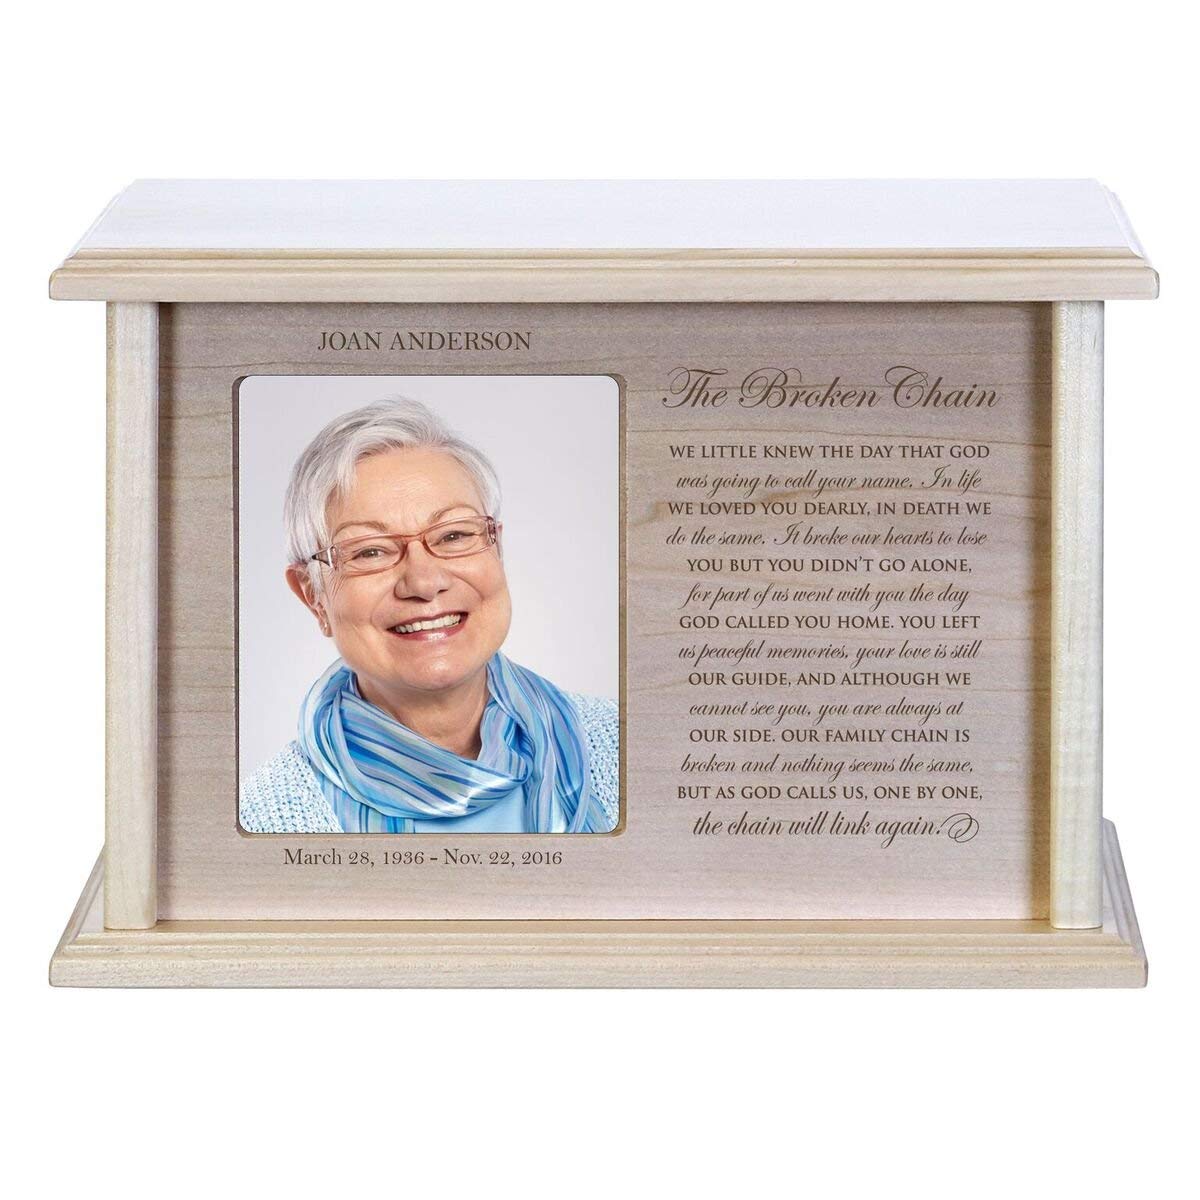 Personalized Wooden Cremation Urn Box - The Broken Chain - LifeSong Milestones